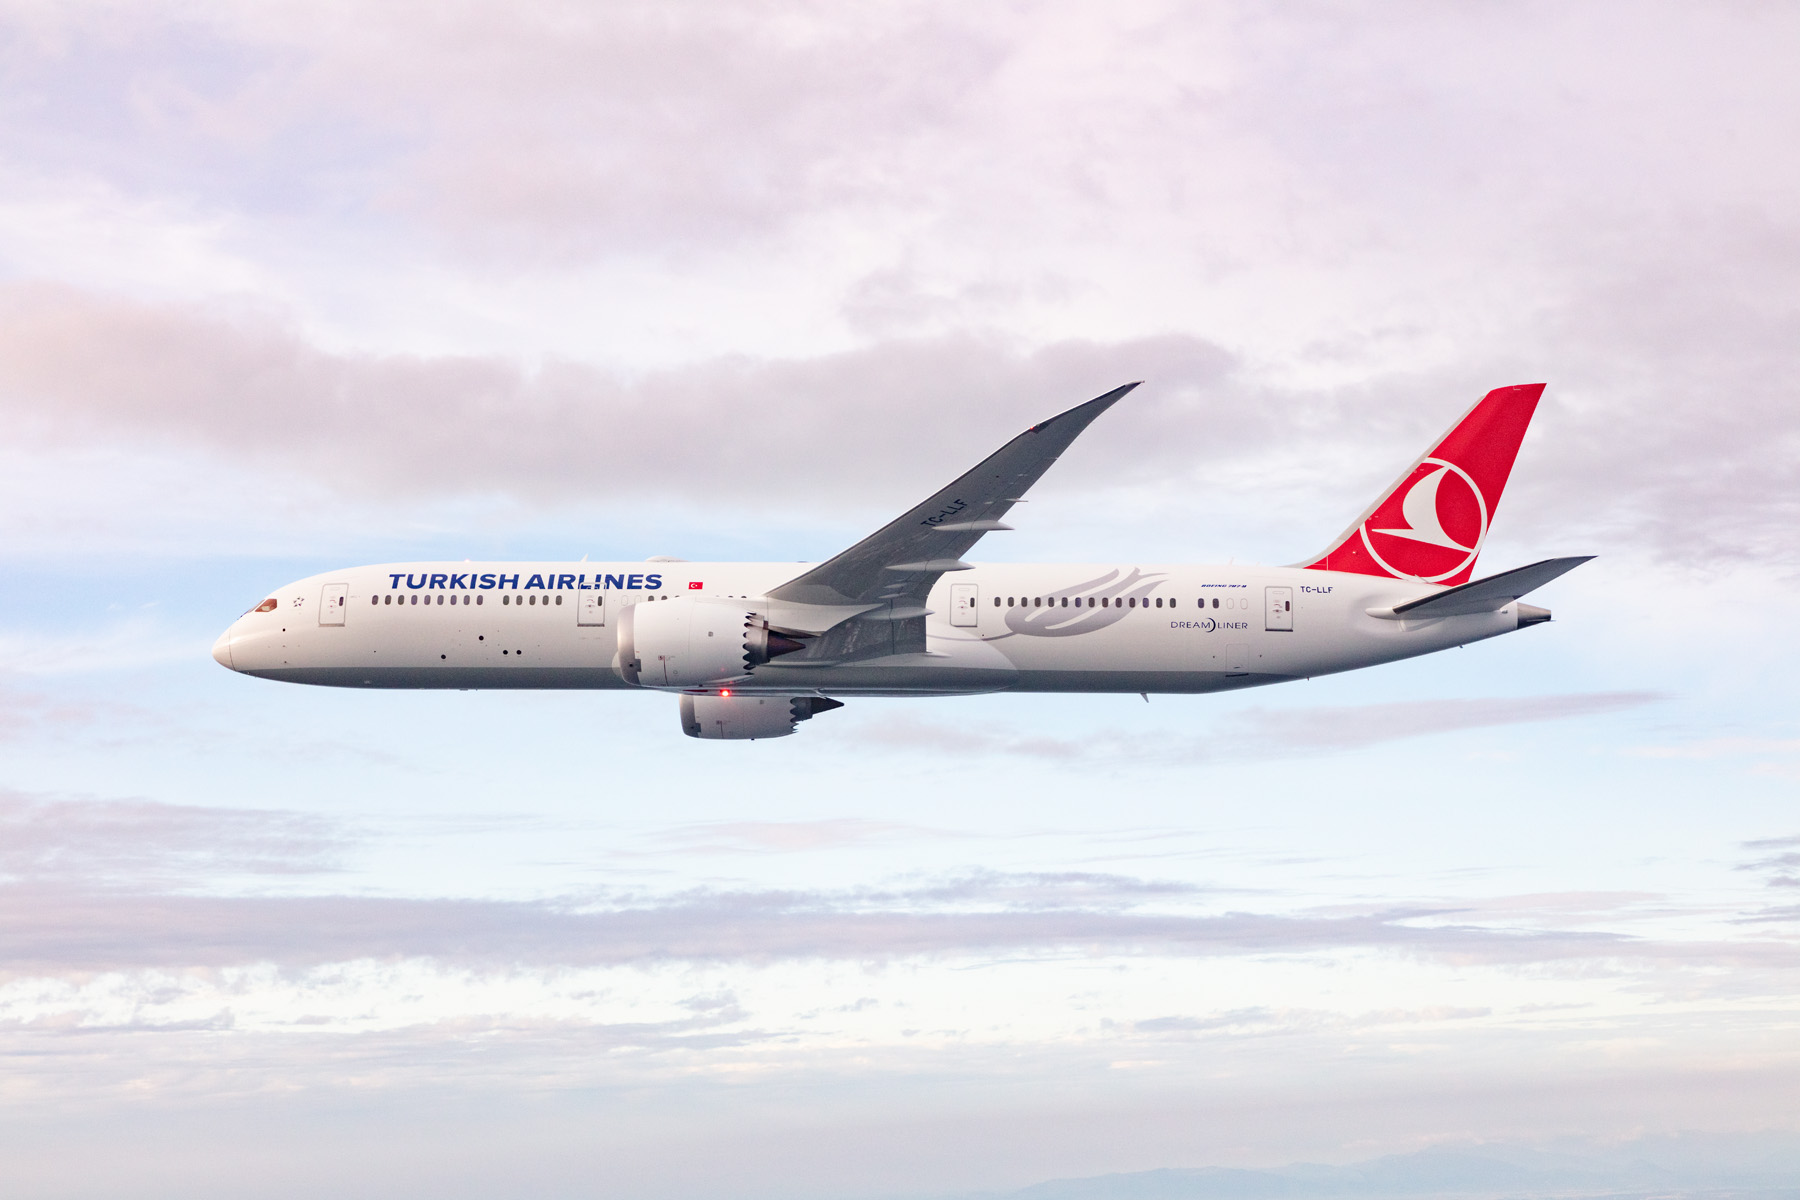 Turkish Airlines carried 7.4 million passengers and recorded the highest May performance